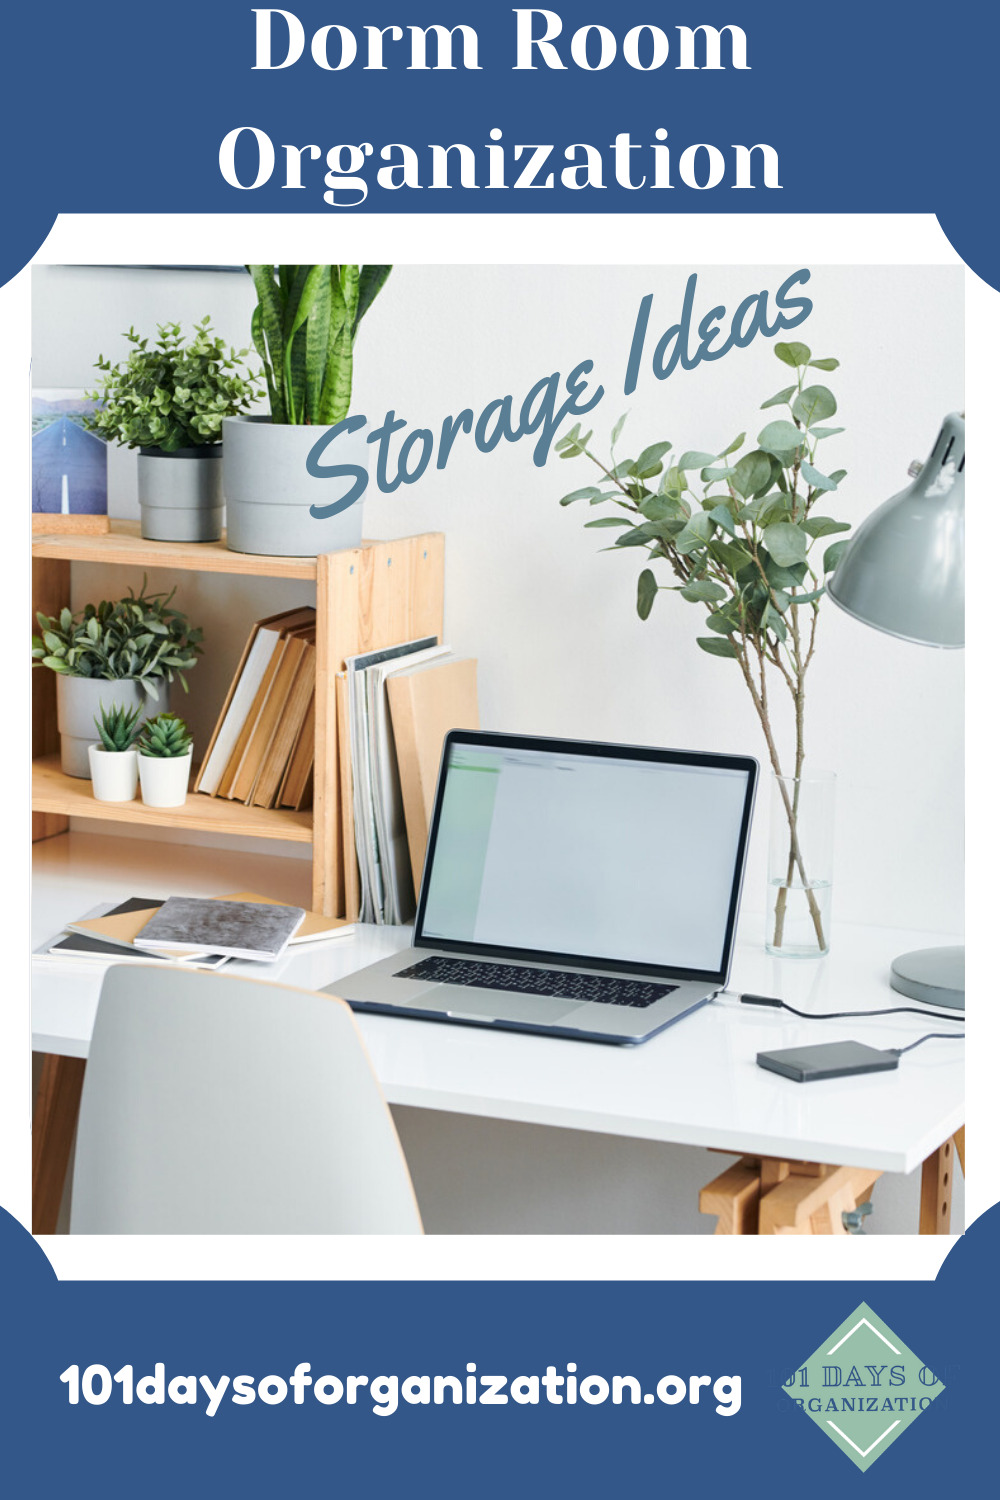 Easy dorm room organization tips and tricks, complete with suggested items to help you get the most out of your space. See how to store all the things you need in easy, accessible ways! #101daysoforganizationblog #dormroomorganization